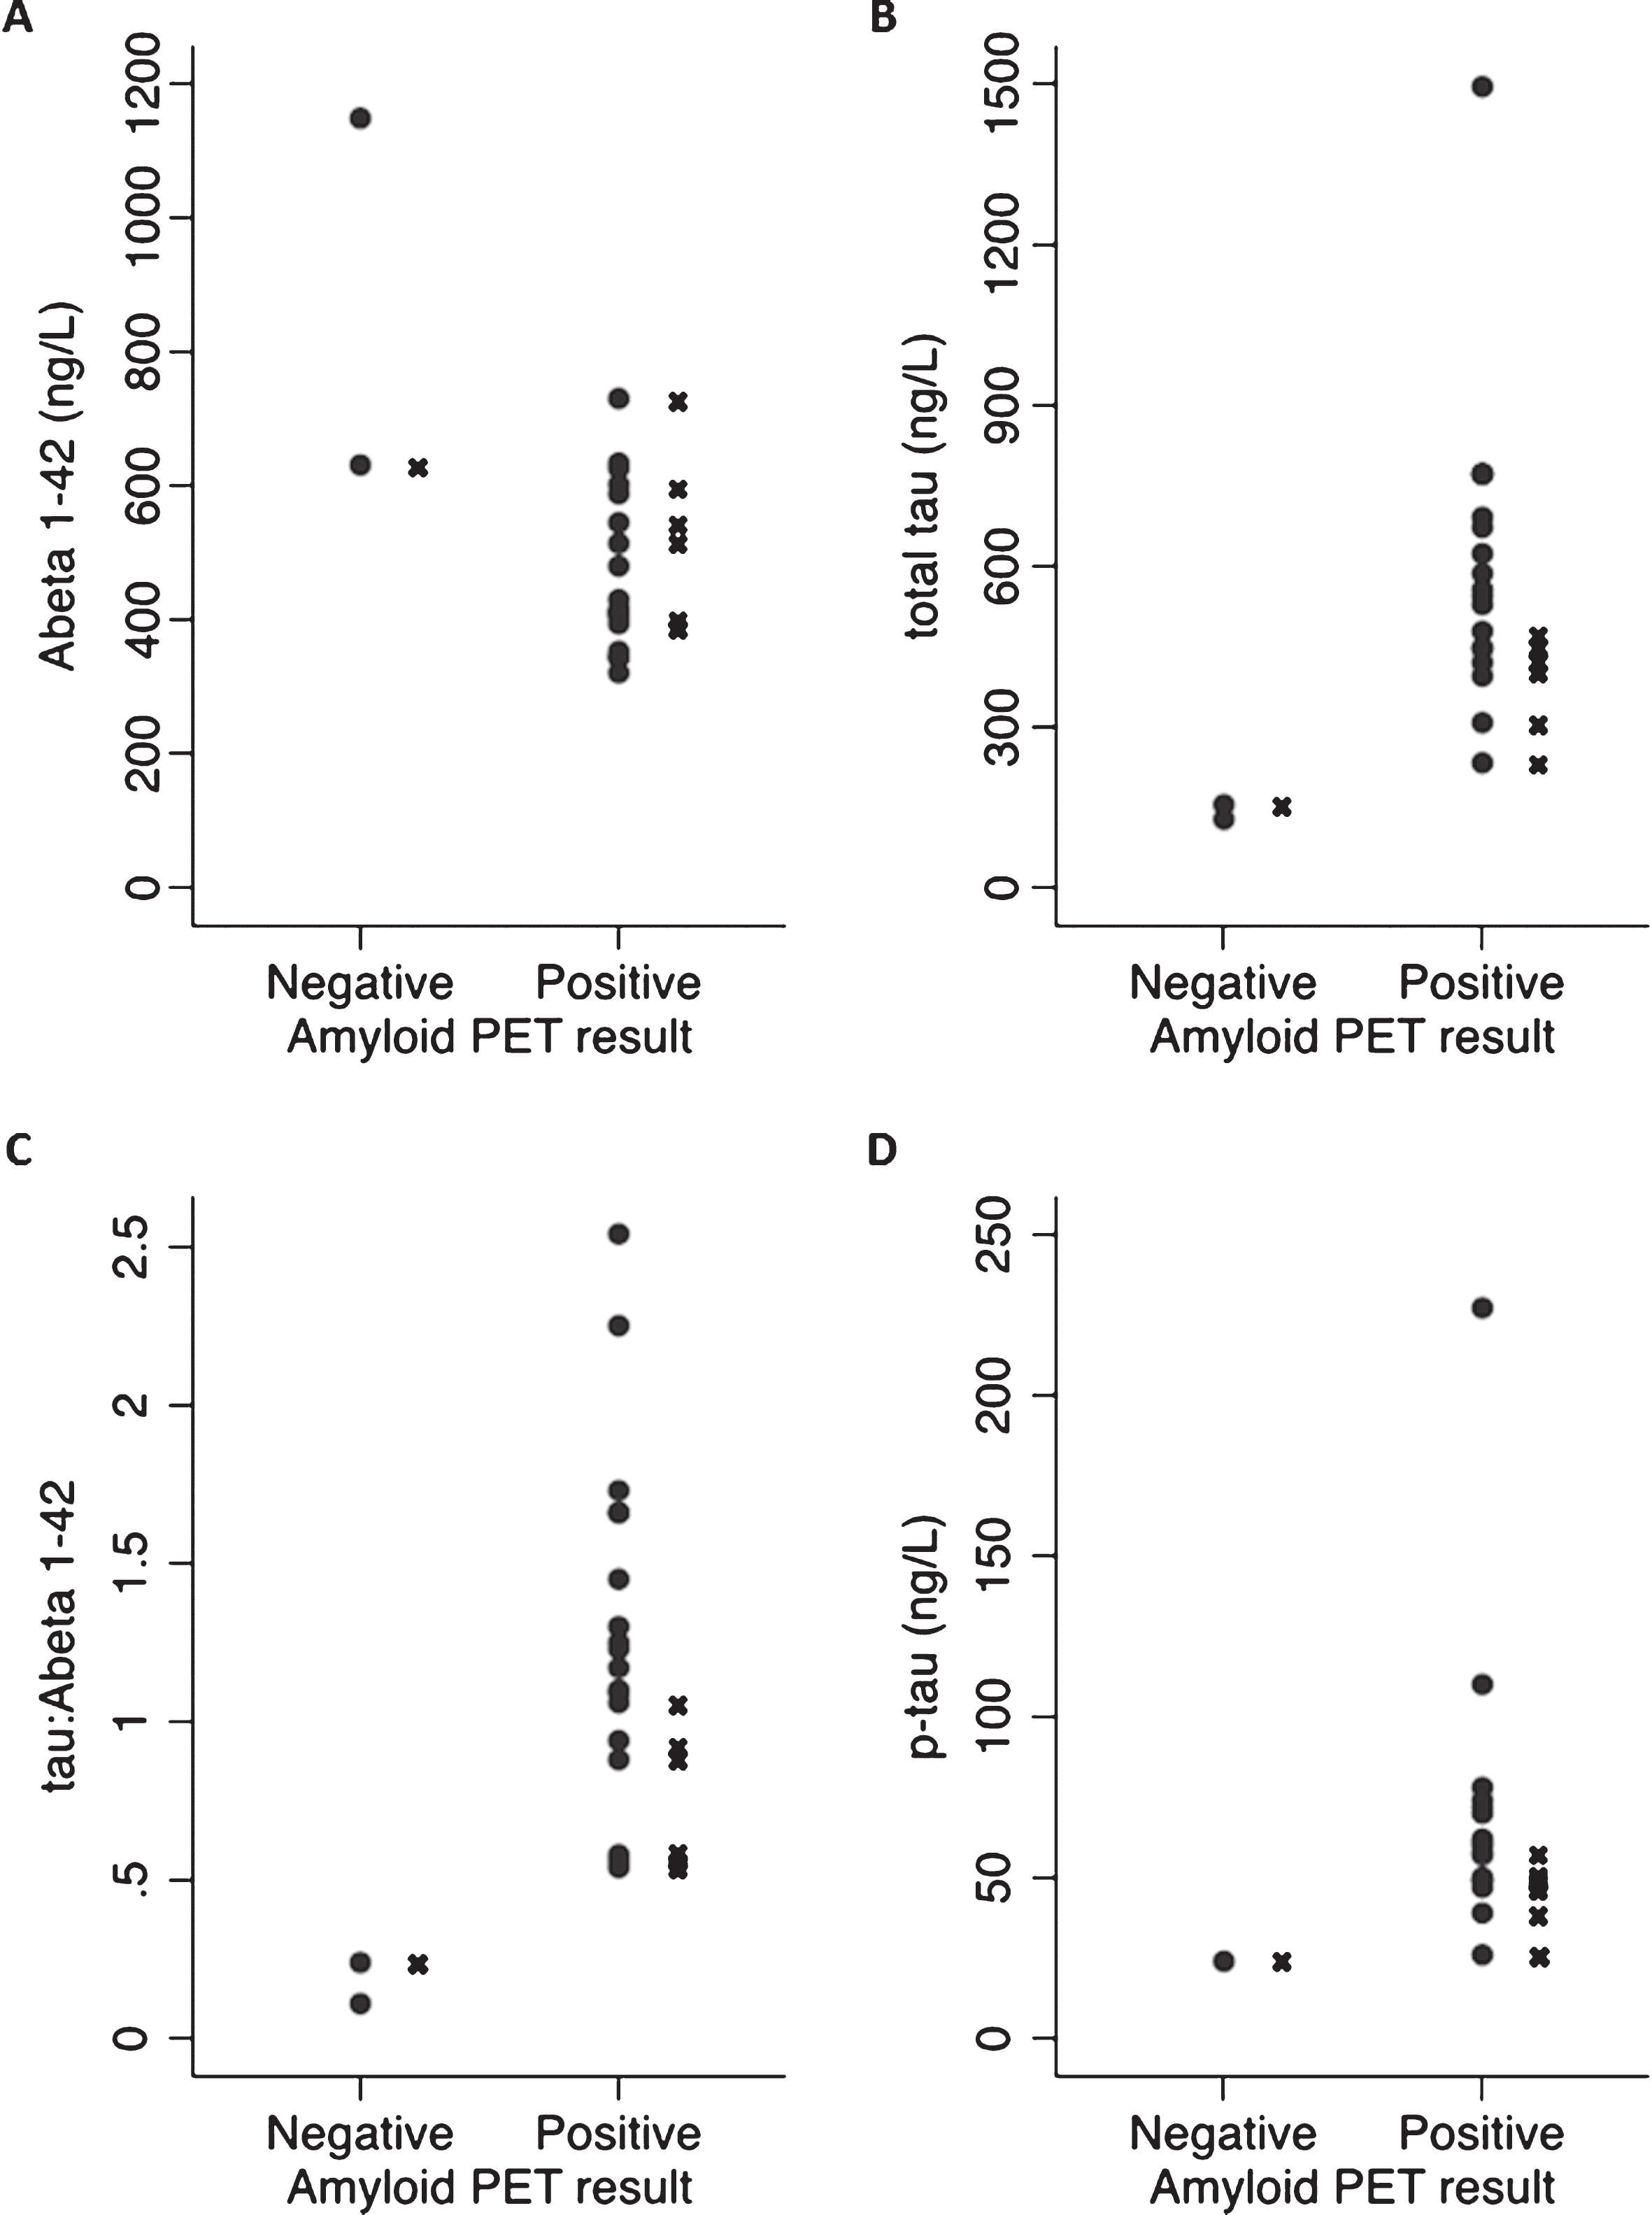 A comparison of CSF values for those with positive and negative amyloid PET scans: Scatter plots show CSF results for (A) Aβ42, (B) total tau, (C) tau:Aβ42, and (D) p-tau for PET positive and negative cases. For two individuals, p-tau measurement had not been possible. Those individuals in whom the amyloid PET scan led to a change in diagnosis are indicated by an X next to the corresponding CSF value.